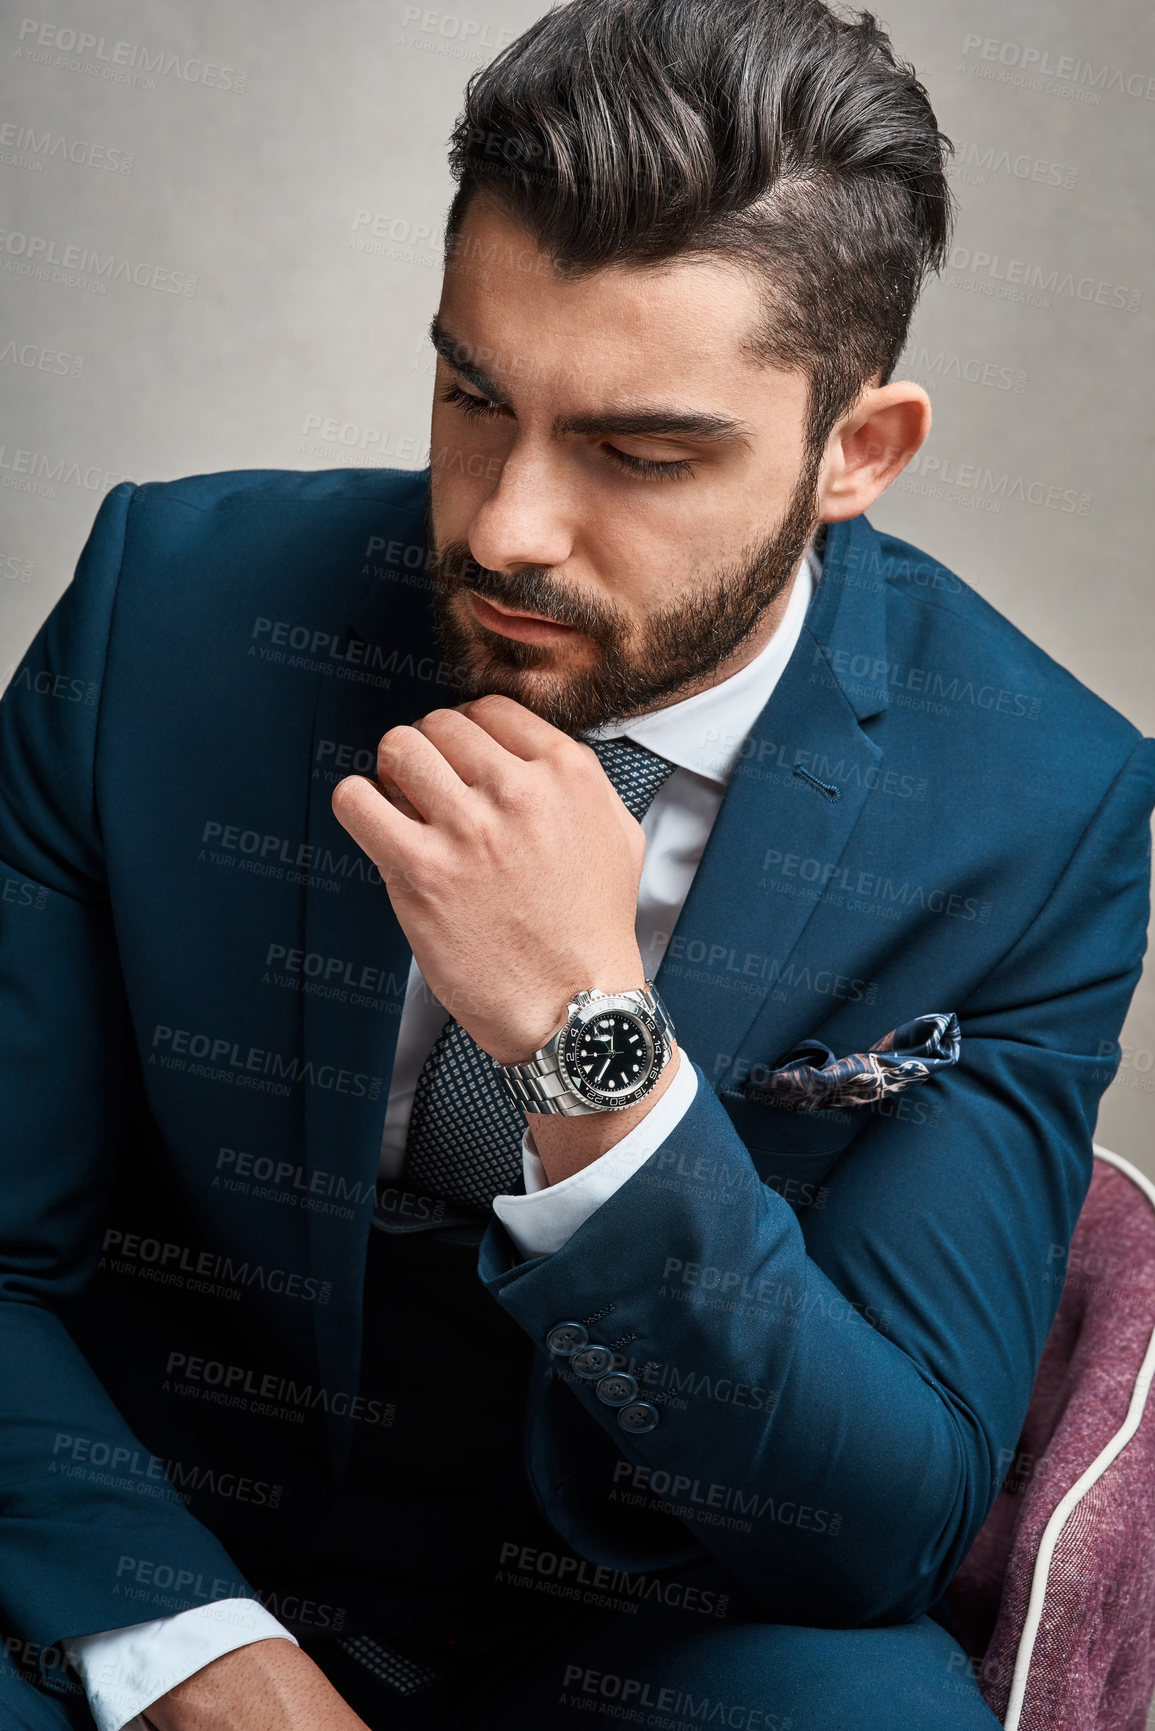 Buy stock photo Studio shot of a young businessman looking thoughtful against a grey background